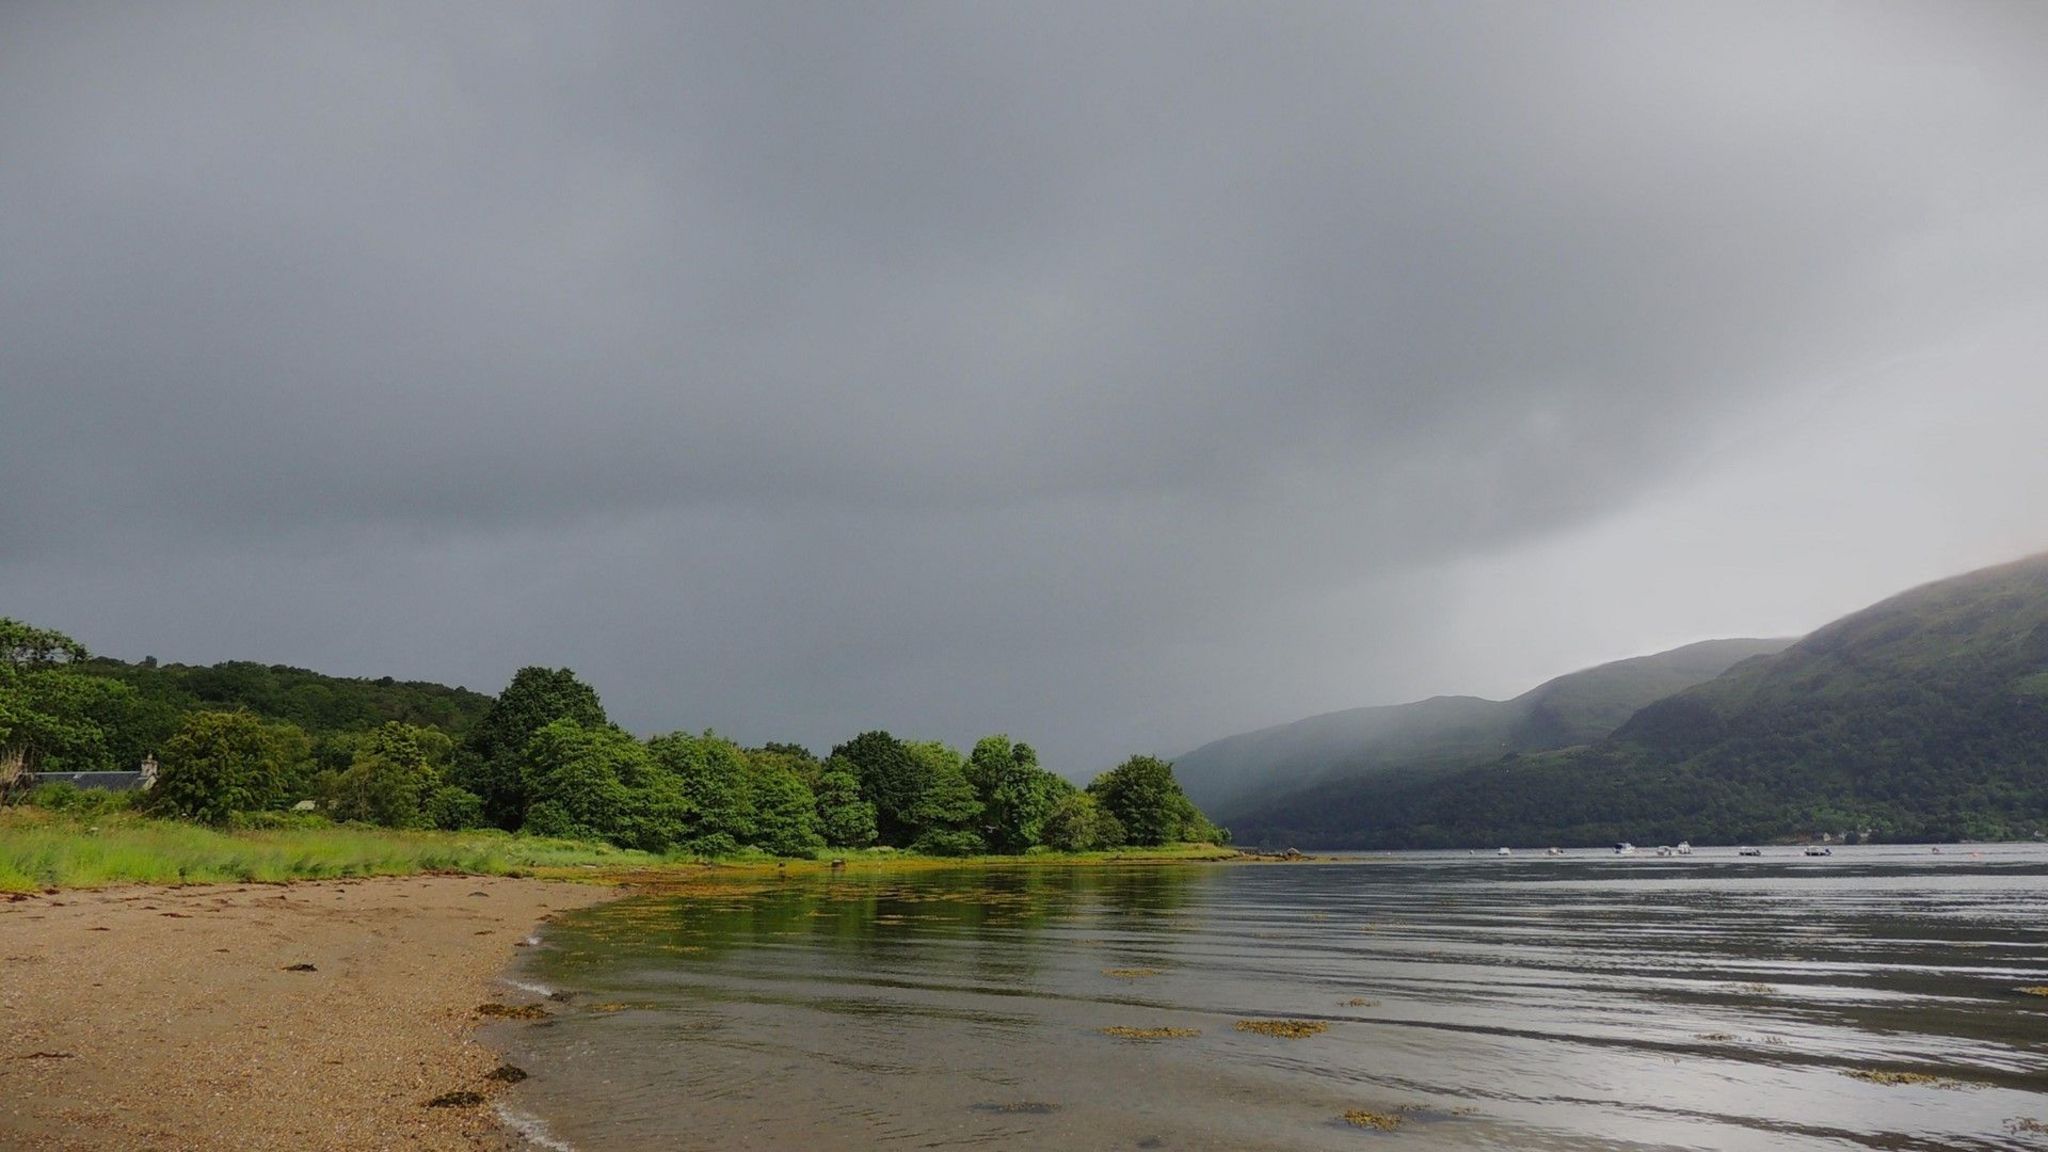 Water, trees, mountains and a dark sky in western Scotland